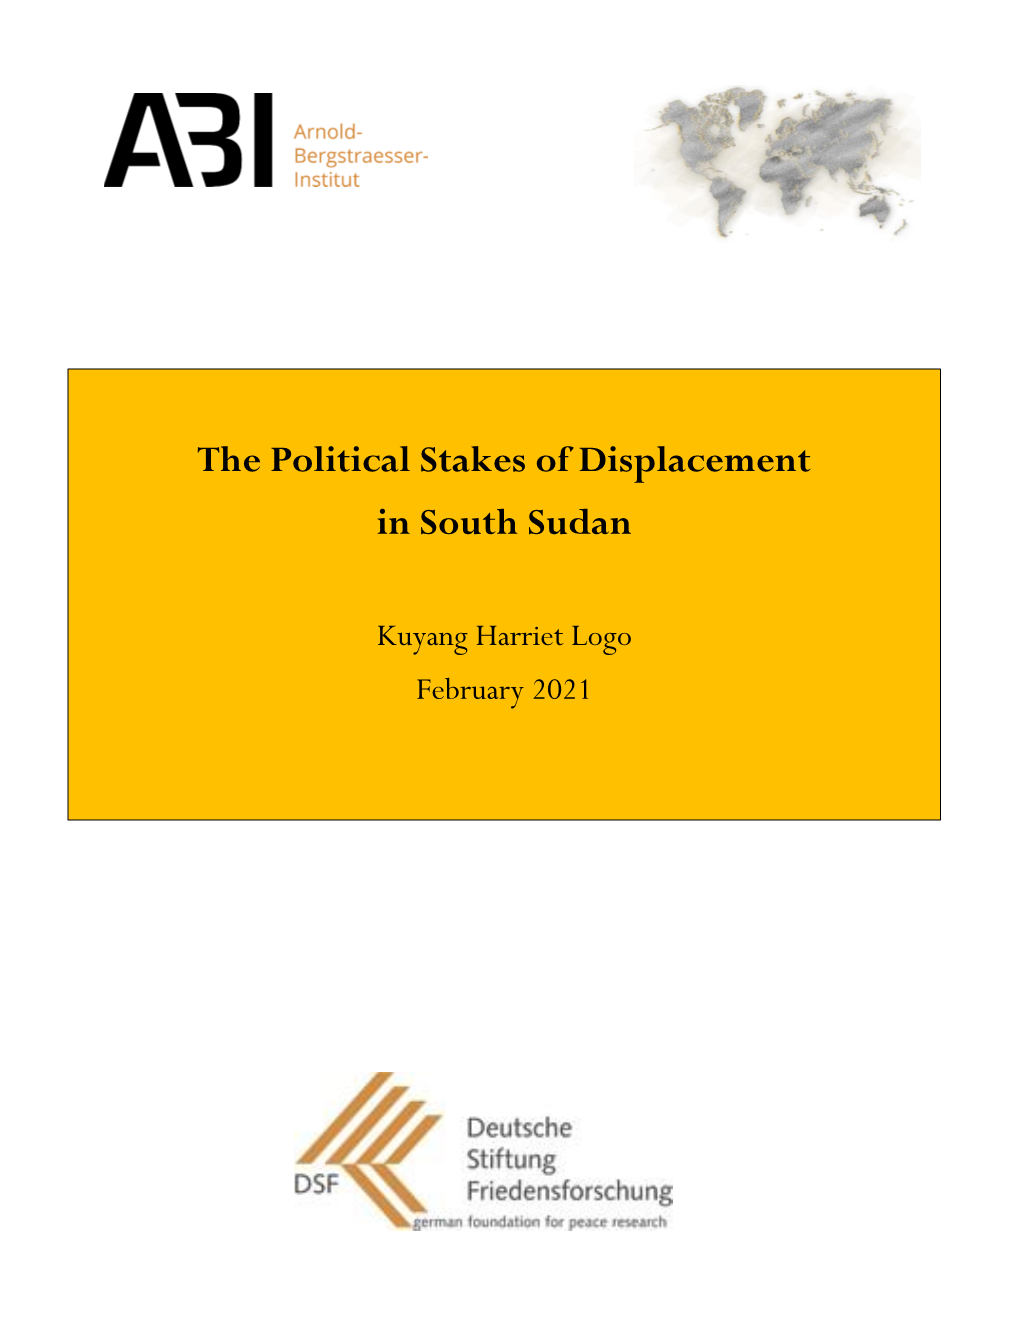 The Political Stakes of Displacement in South Sudan